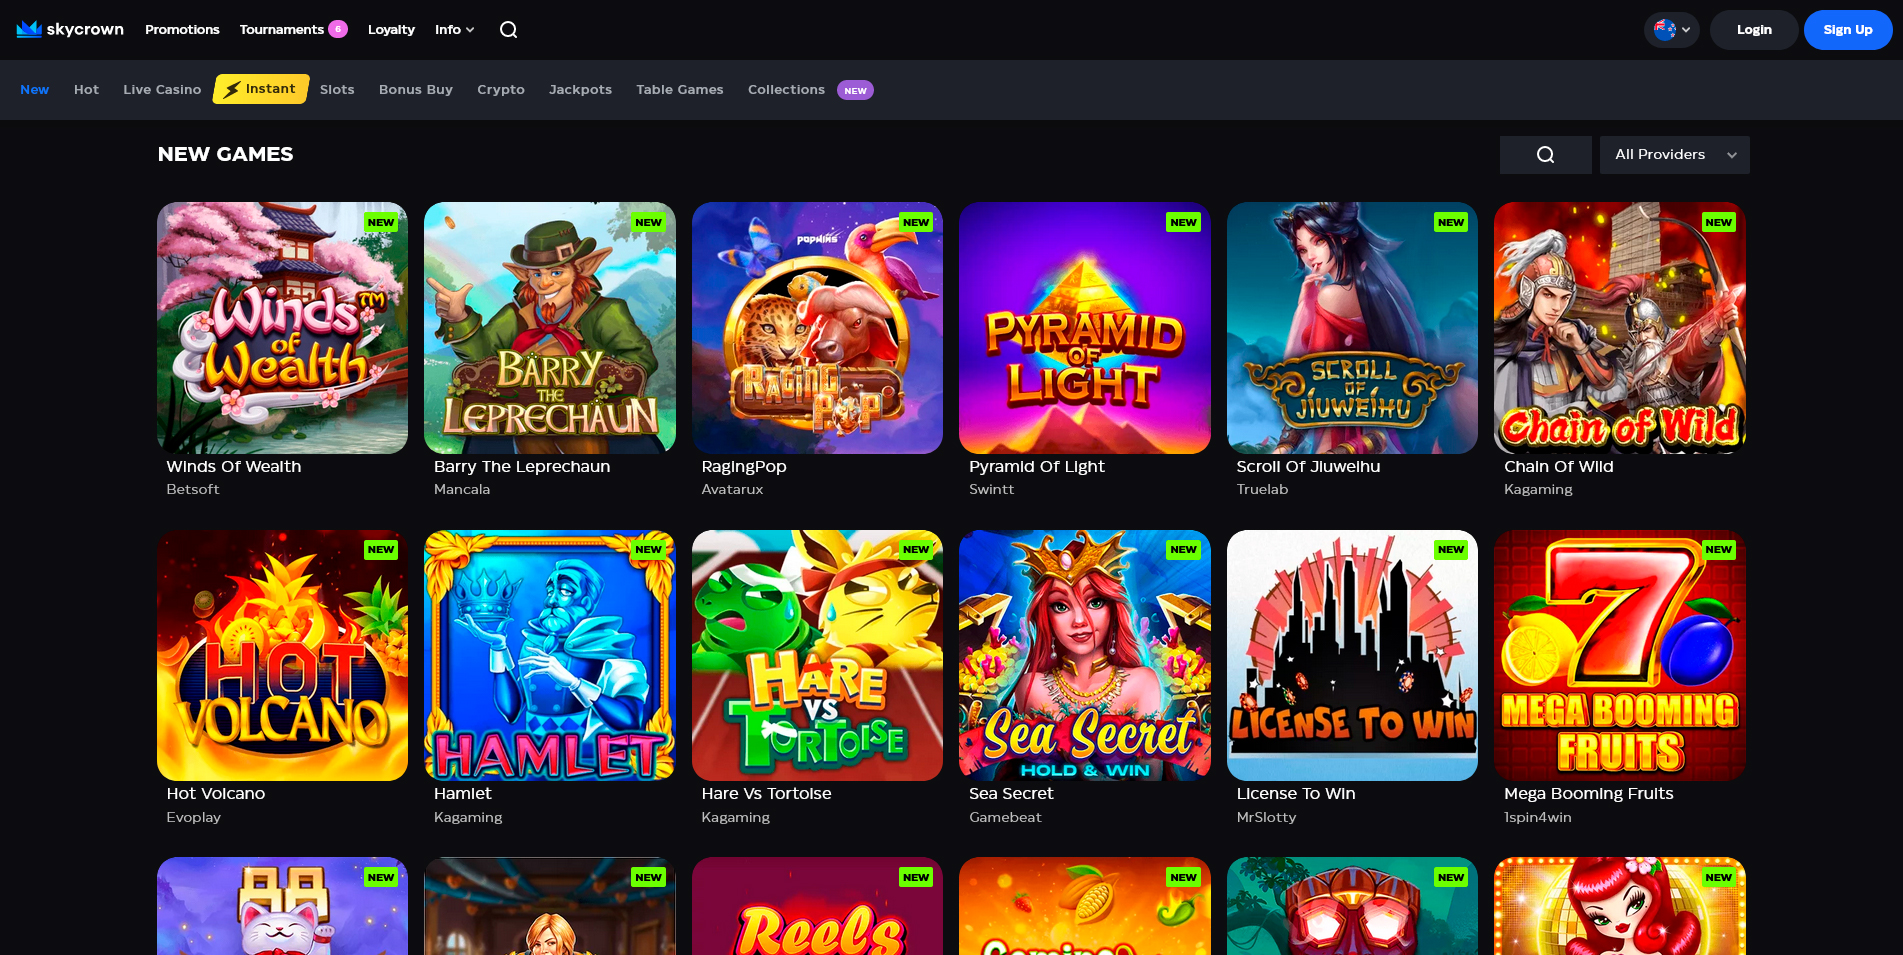 Screenshot of the SkyCrown Casino Game Section